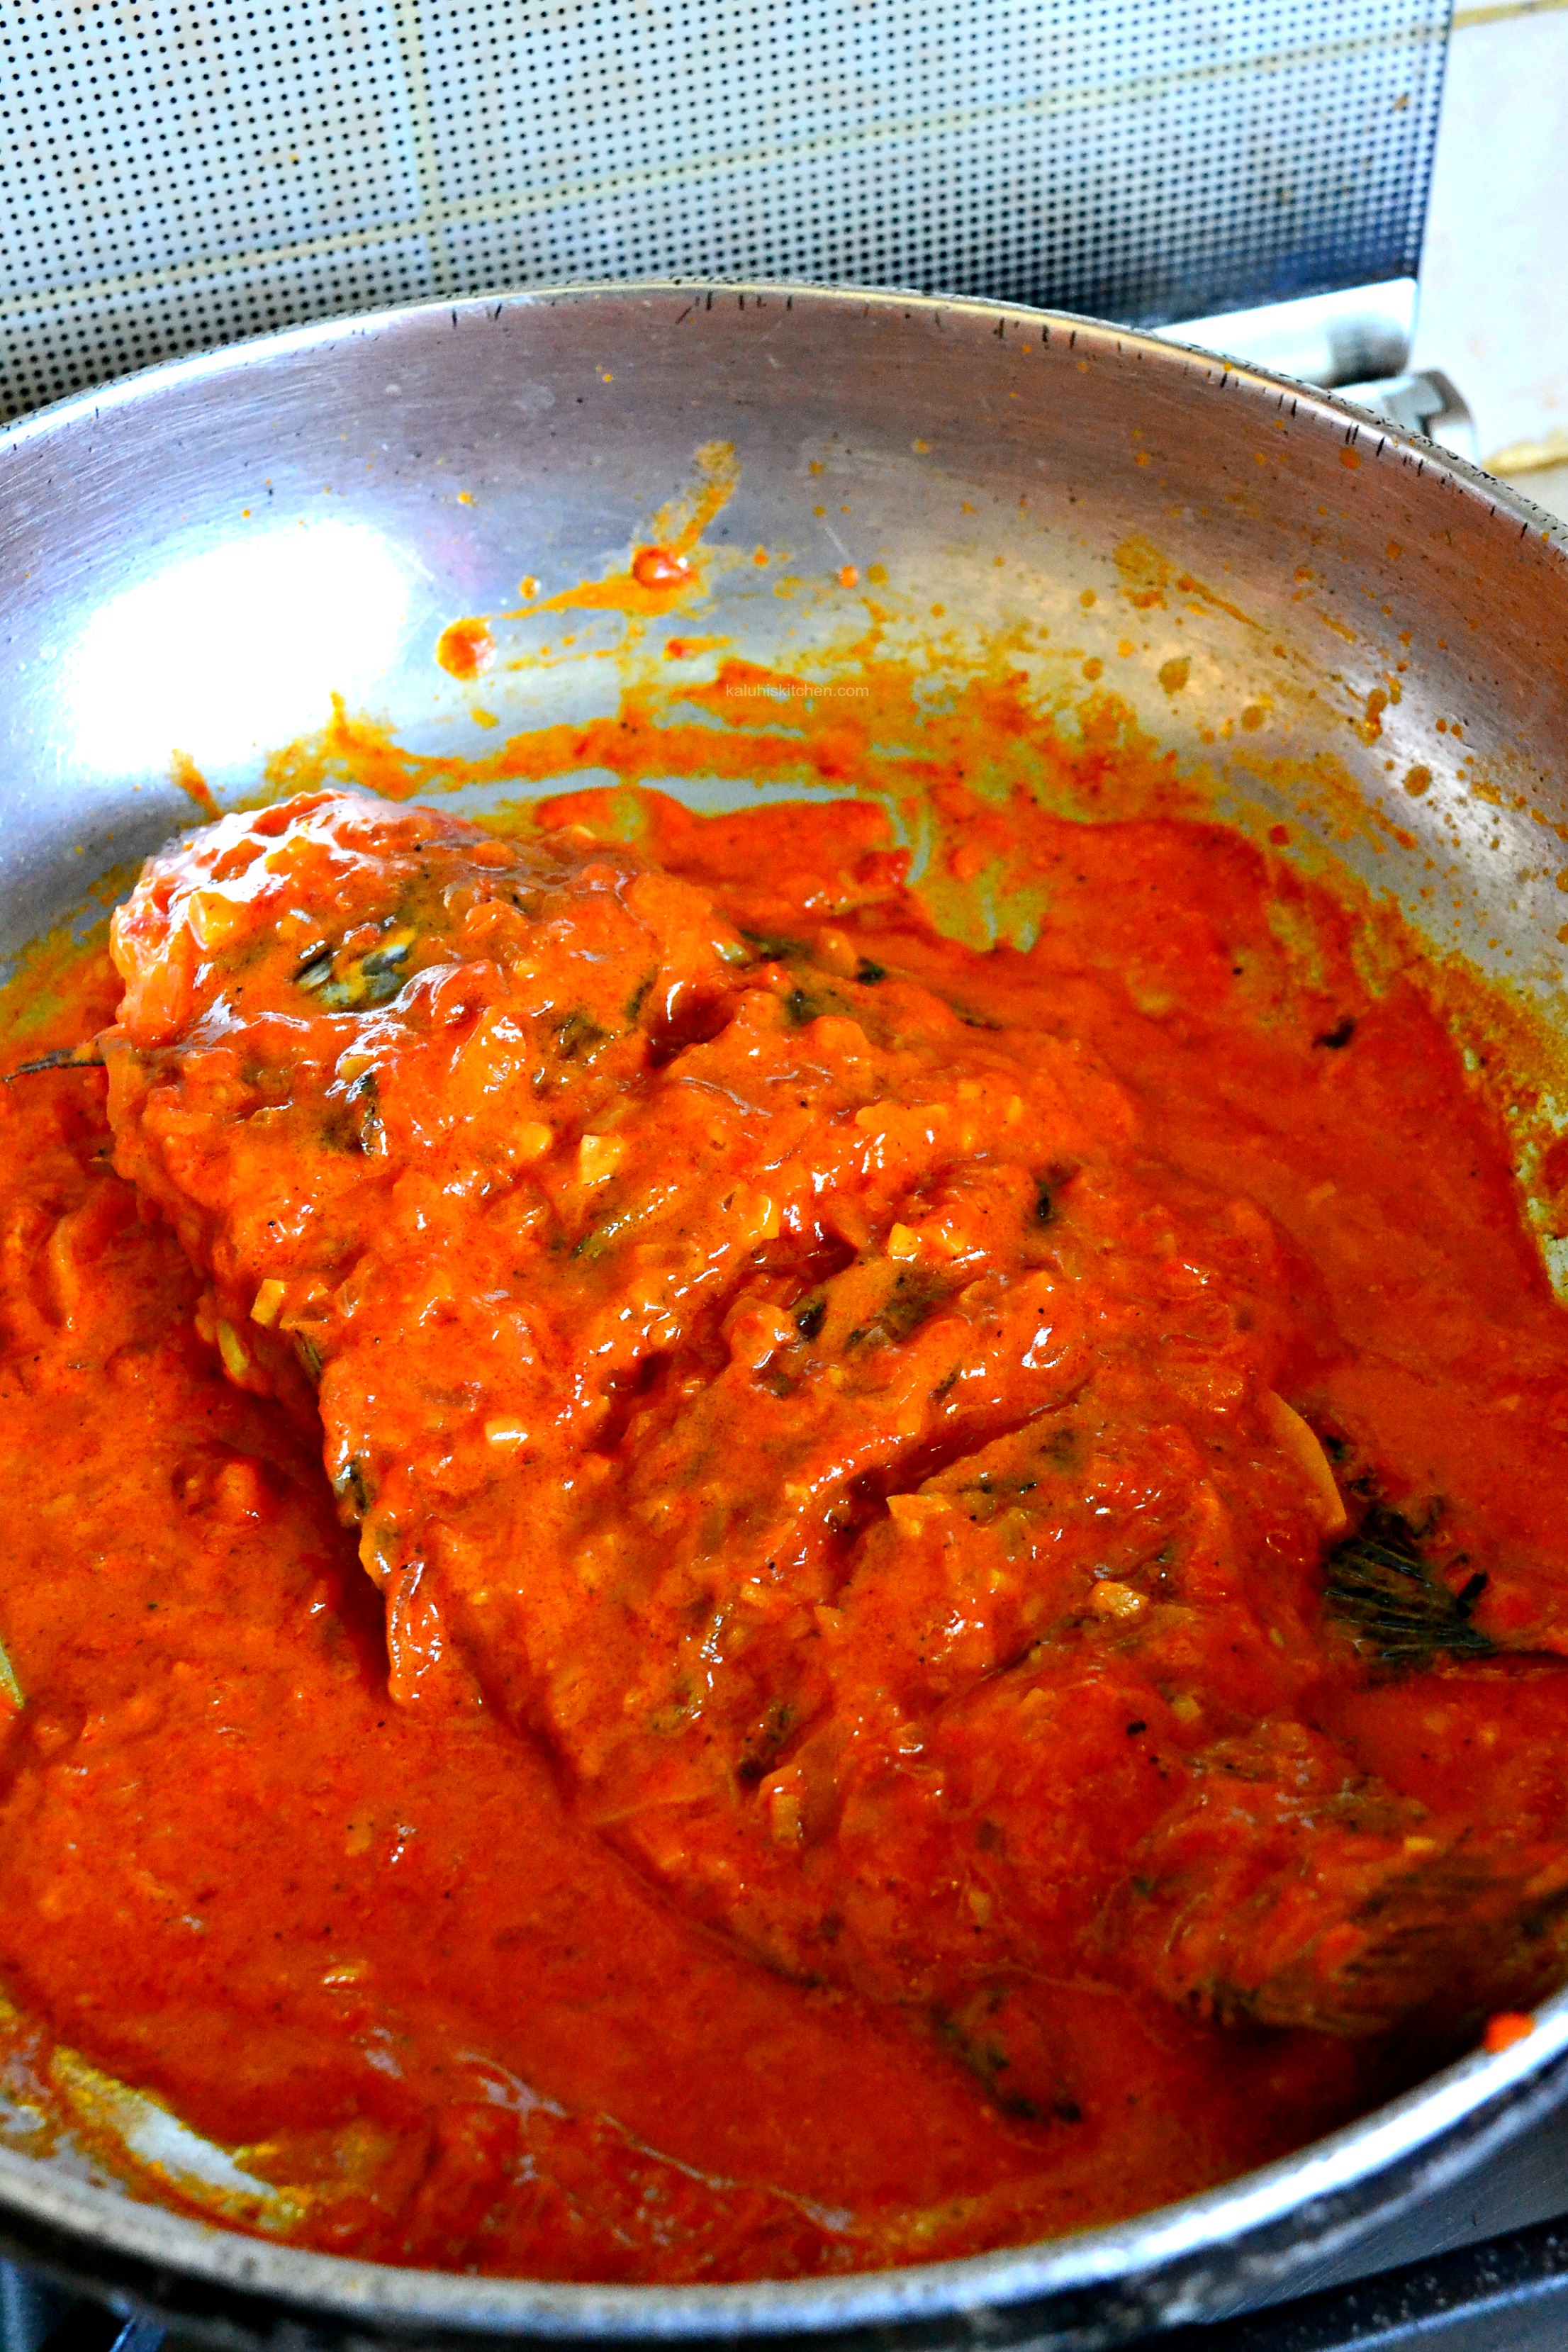 slather-the-scooped-out-tomato-mixture-over-the-fish-and-allow-it-to-simmer-down-for-about-5-10-minutes-for-all-flavors-to-meld_kaluhiskitchen-com